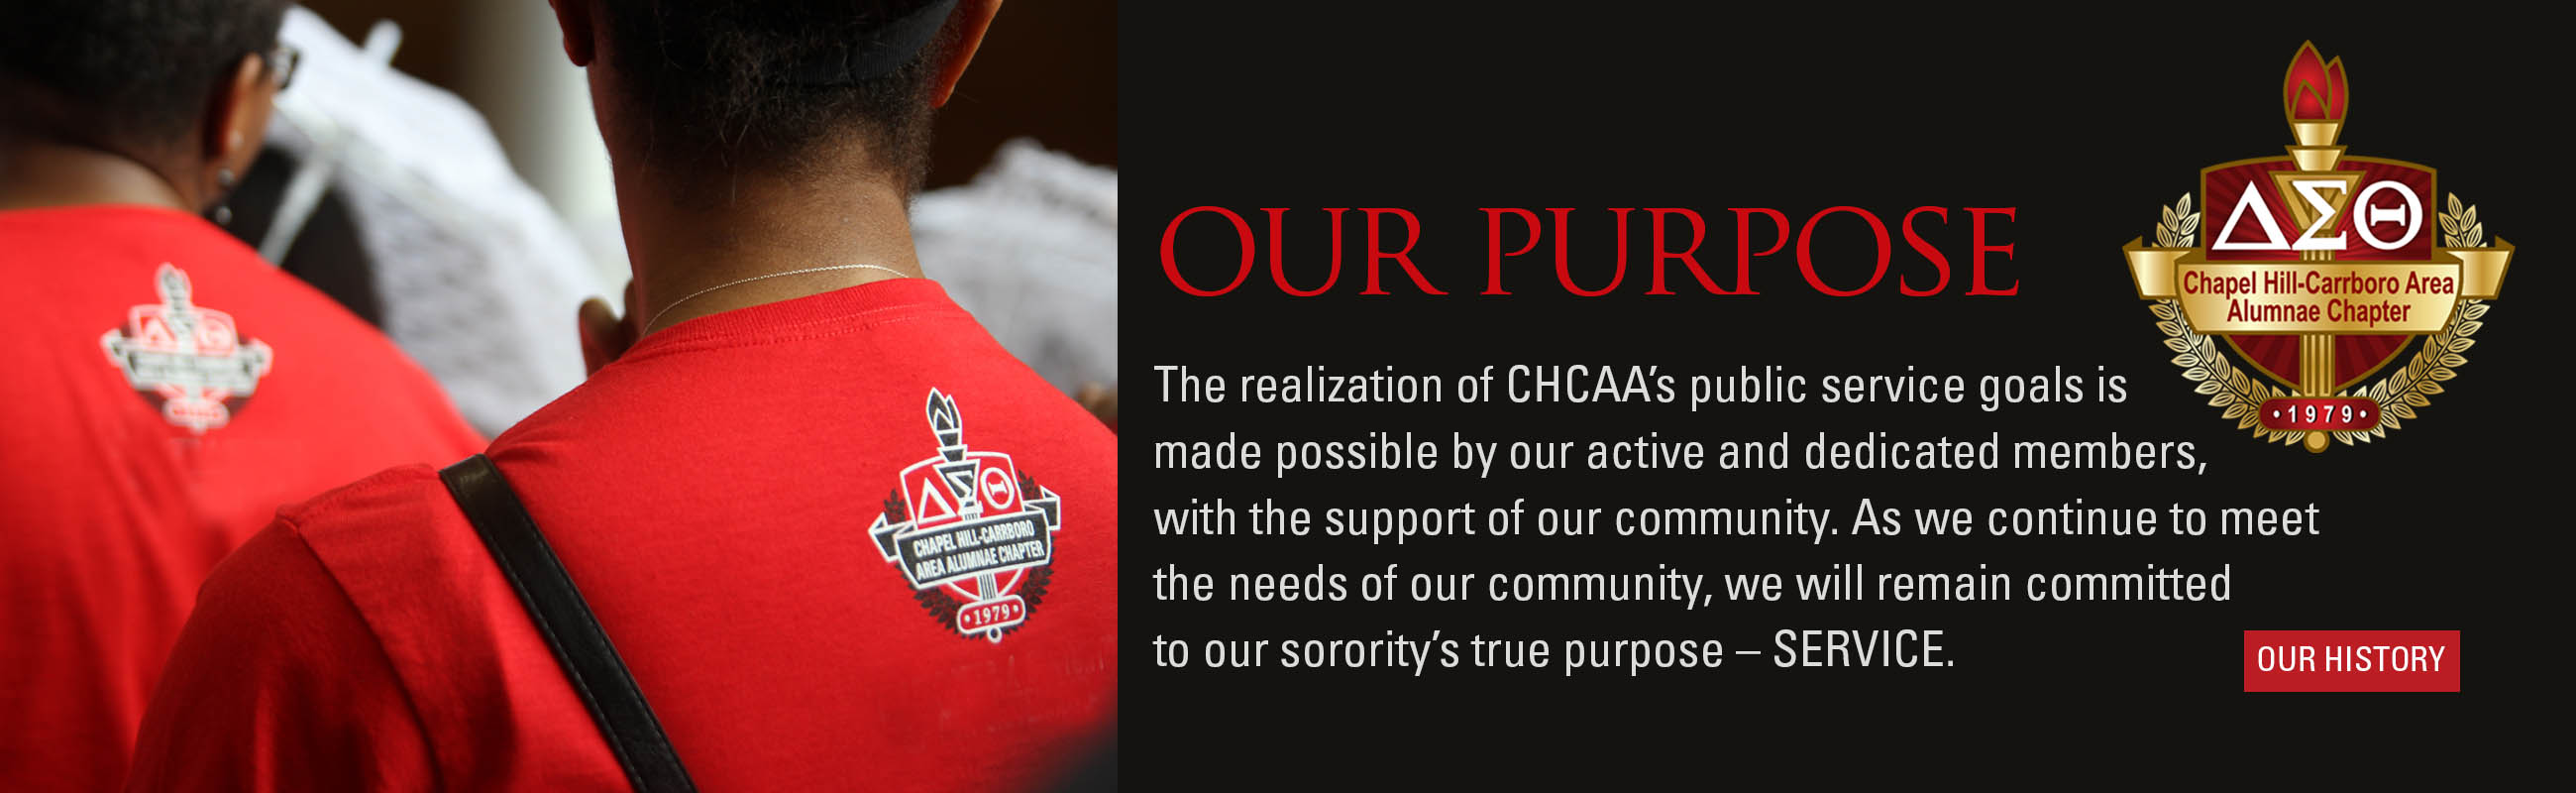 chcaa_our_purpose